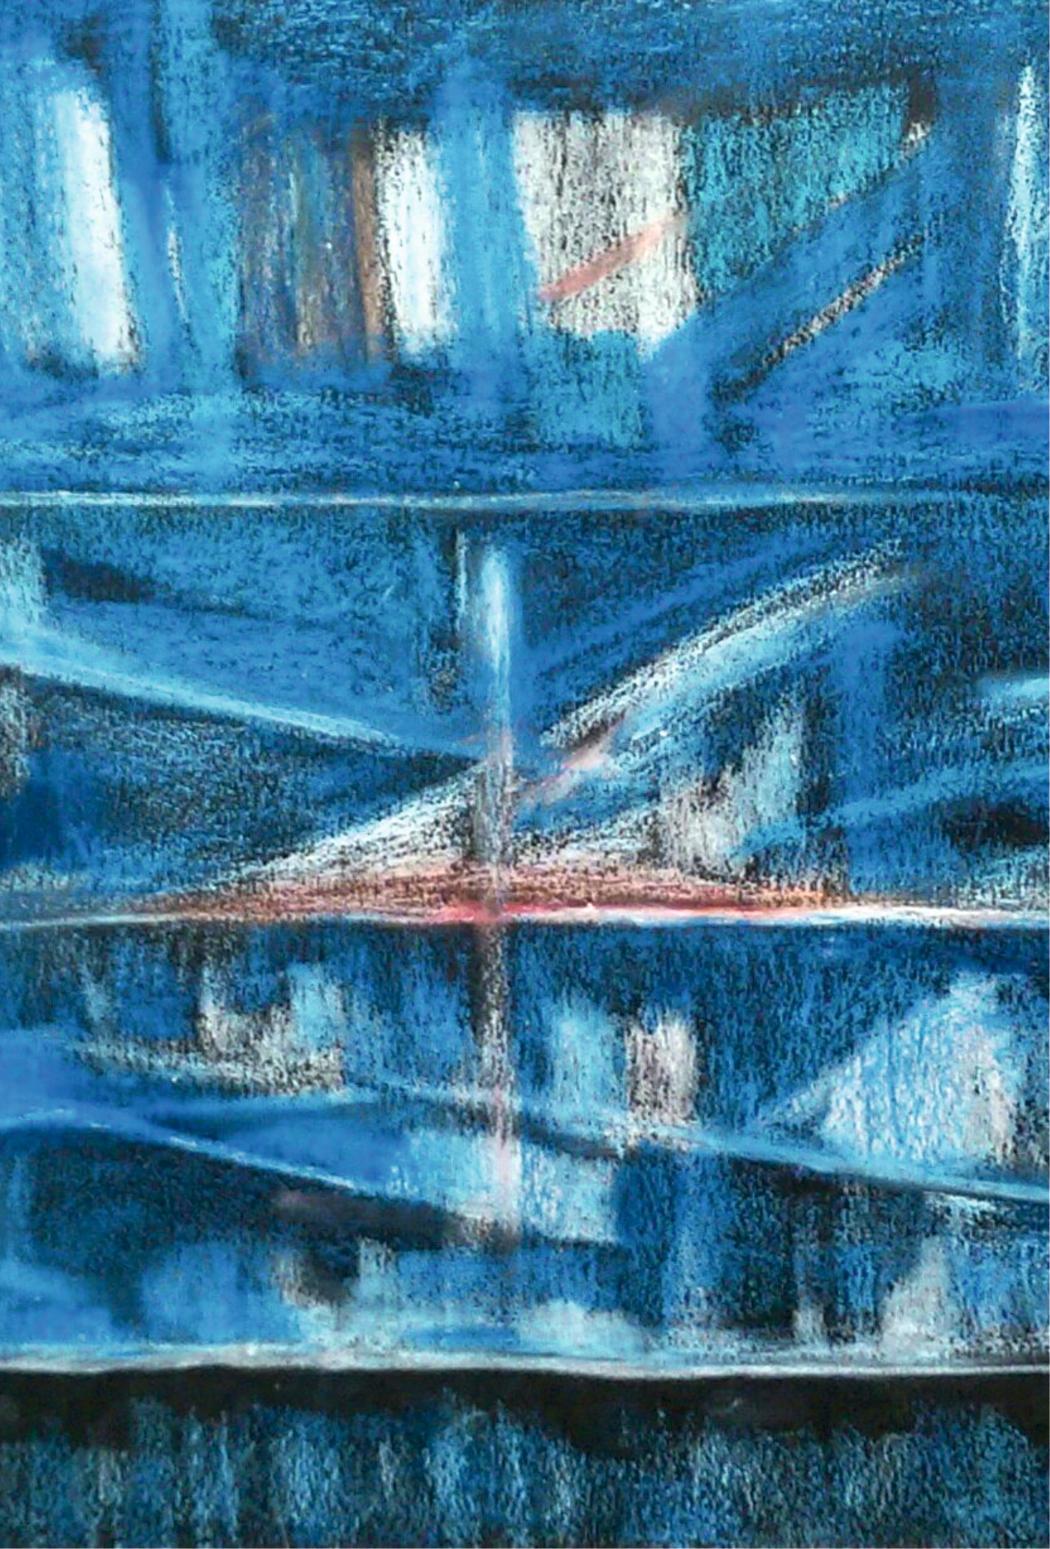 Blue levels / Oil pastel / 50 x 70 cm  - Abstract Painting by Tadeusz Zych